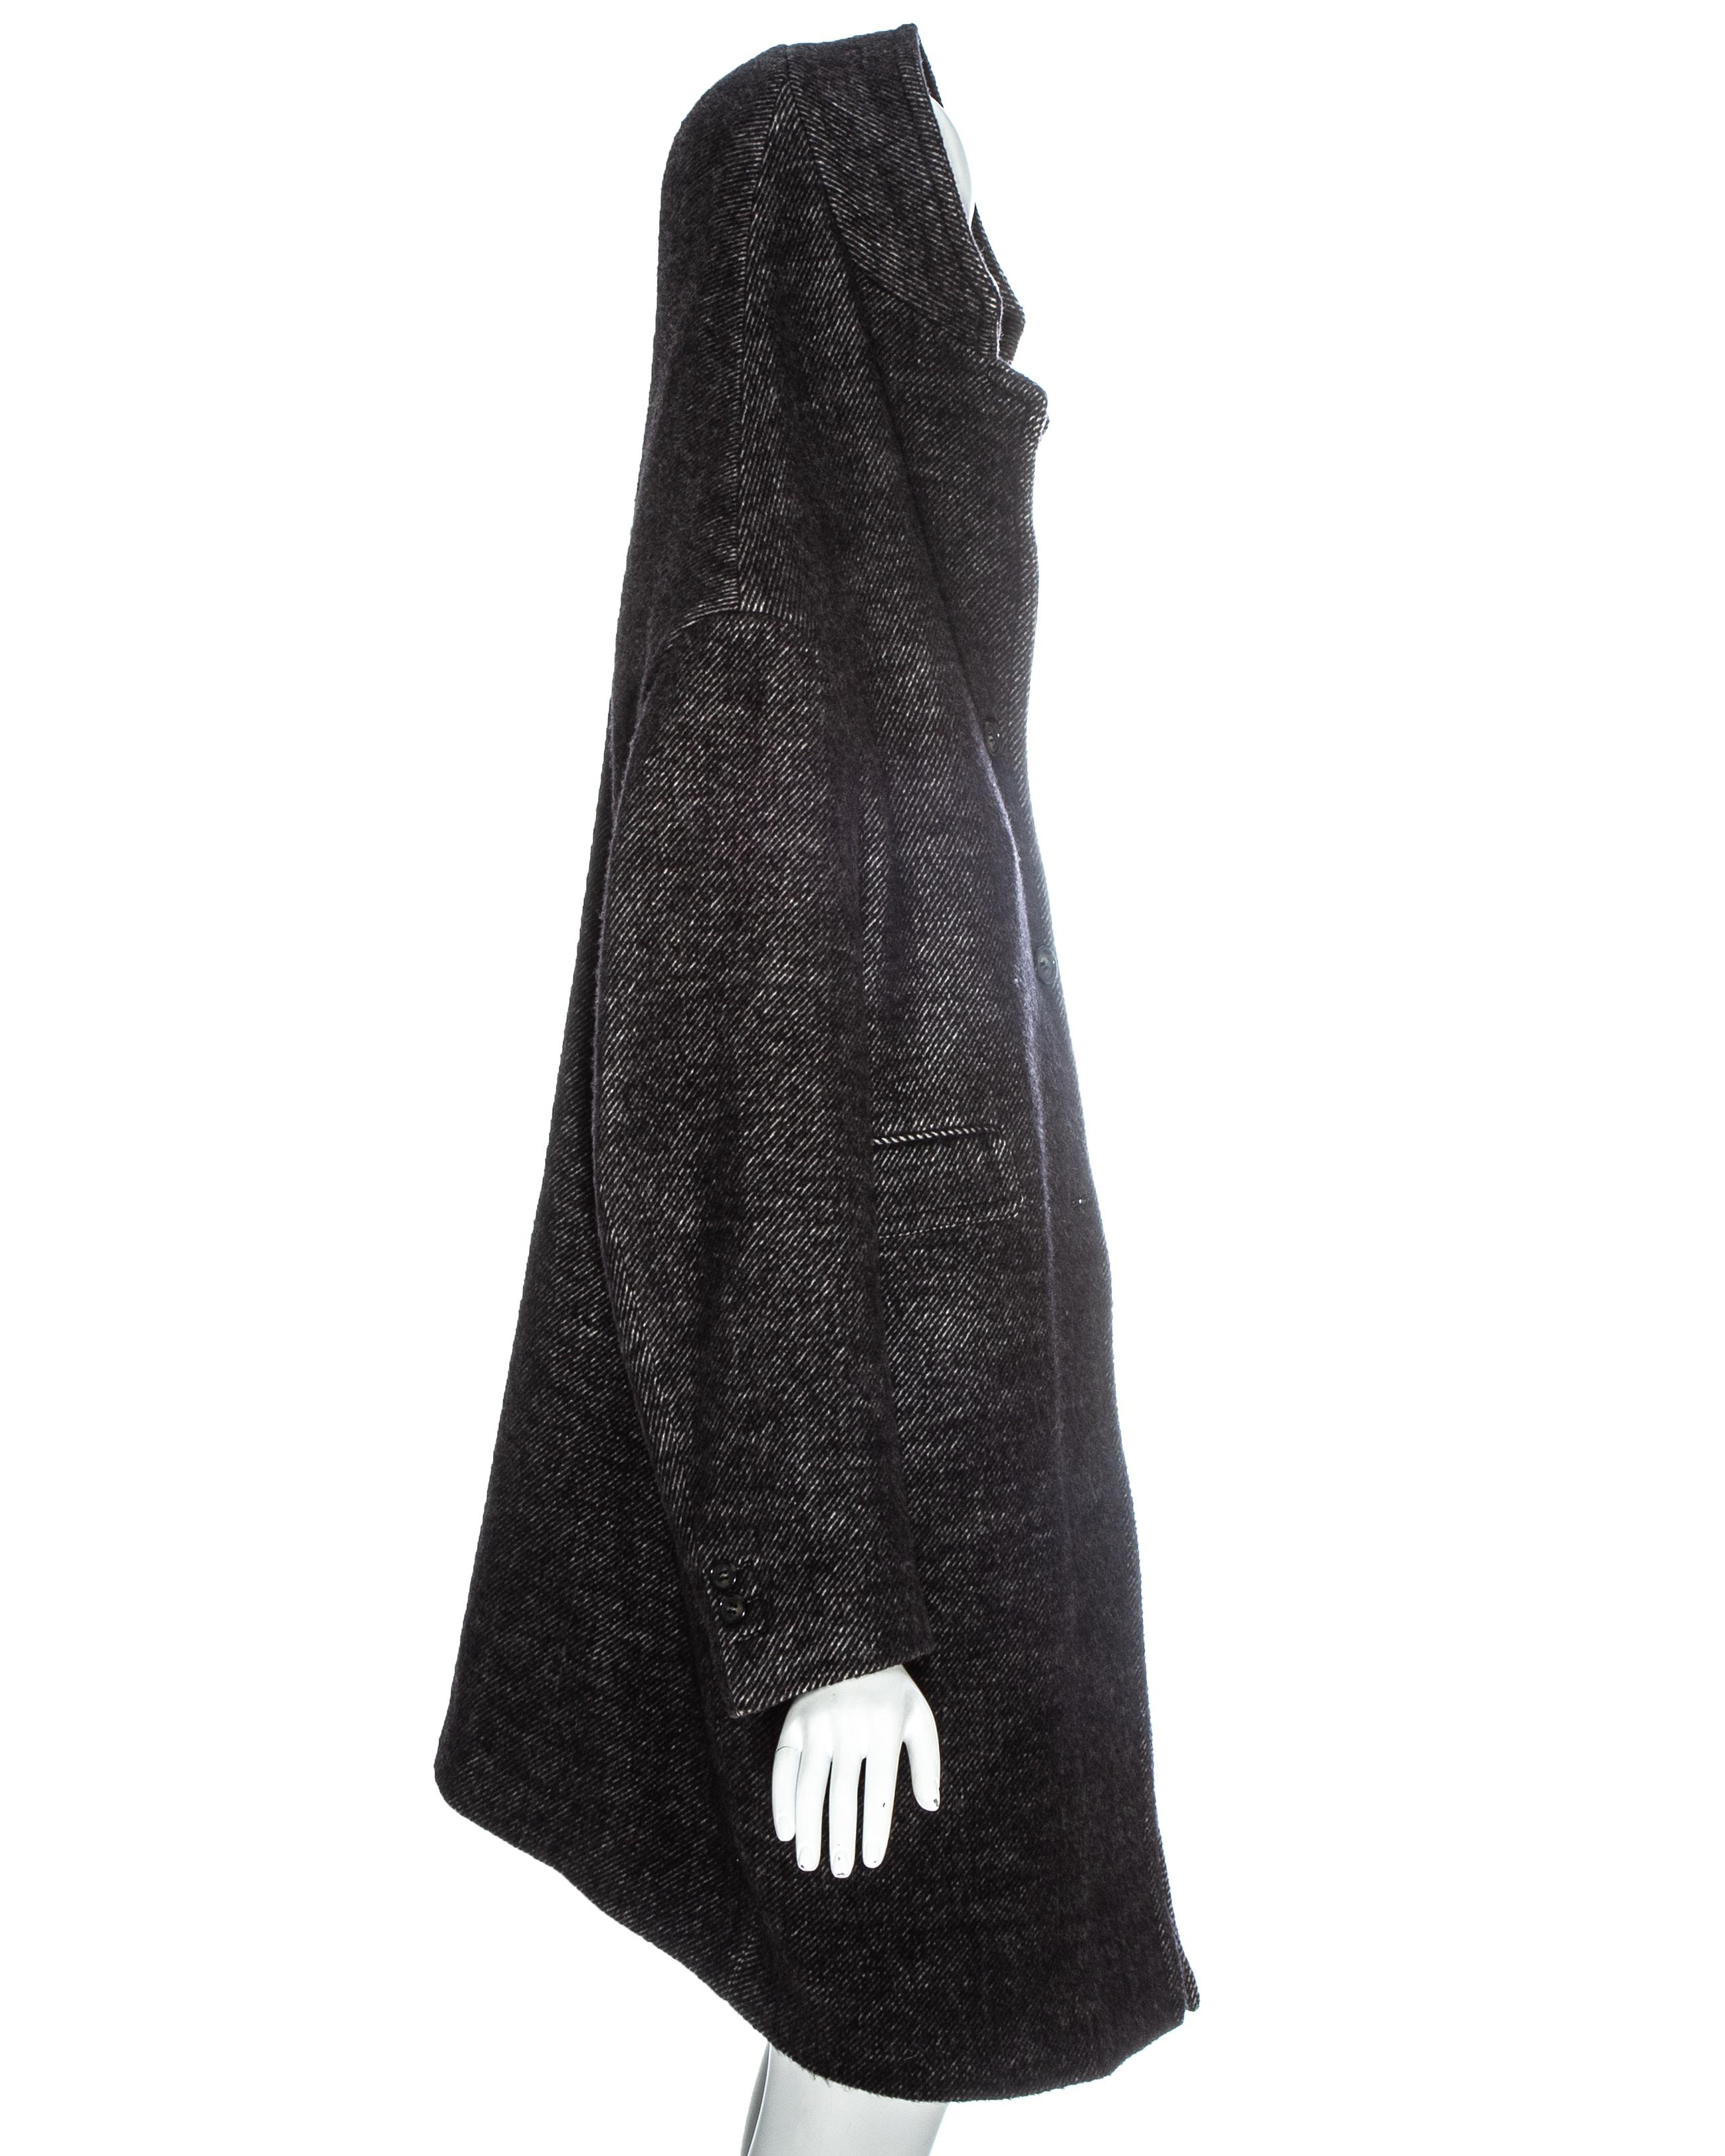 Martin Margiela dark grey wool coat with an elongated hood-collar, fw 2005 In Excellent Condition For Sale In London, GB